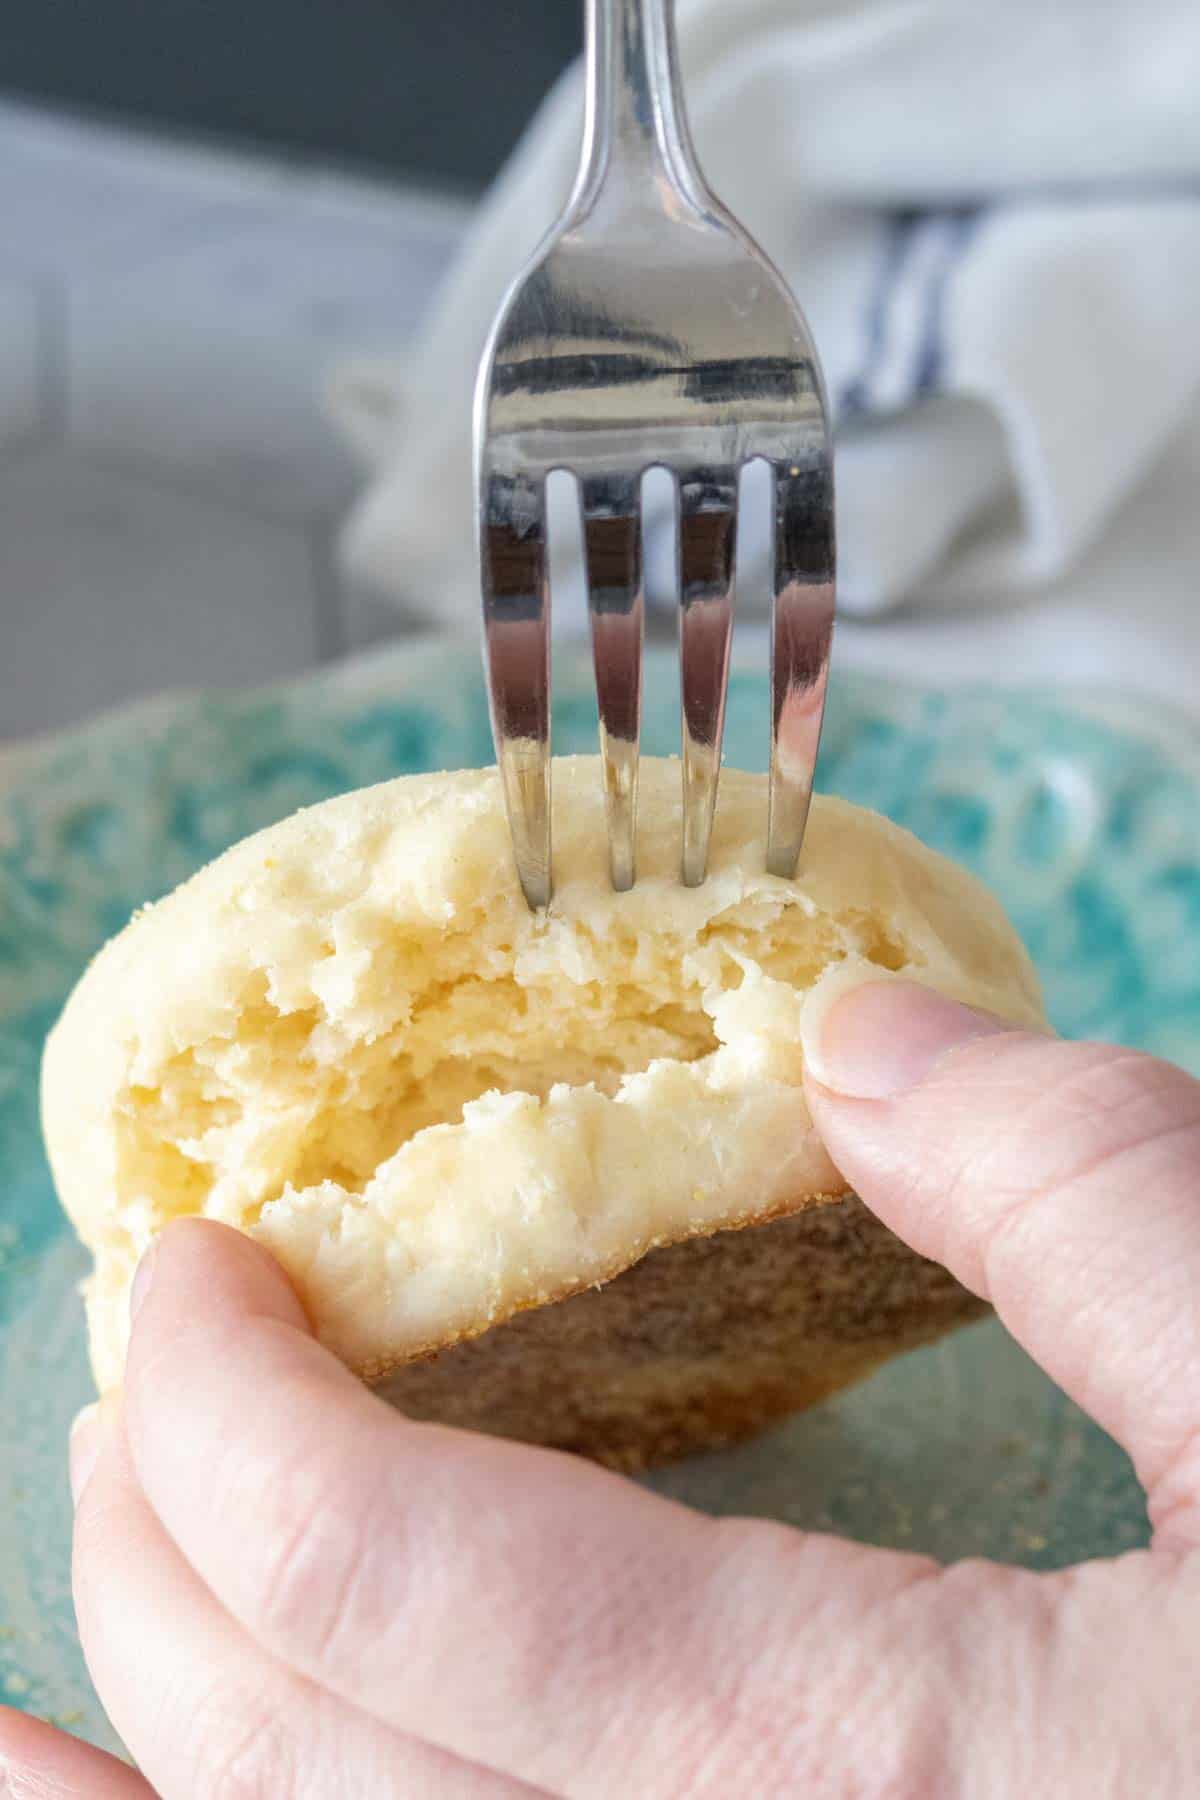 Splitting apart an English muffin with a fork.